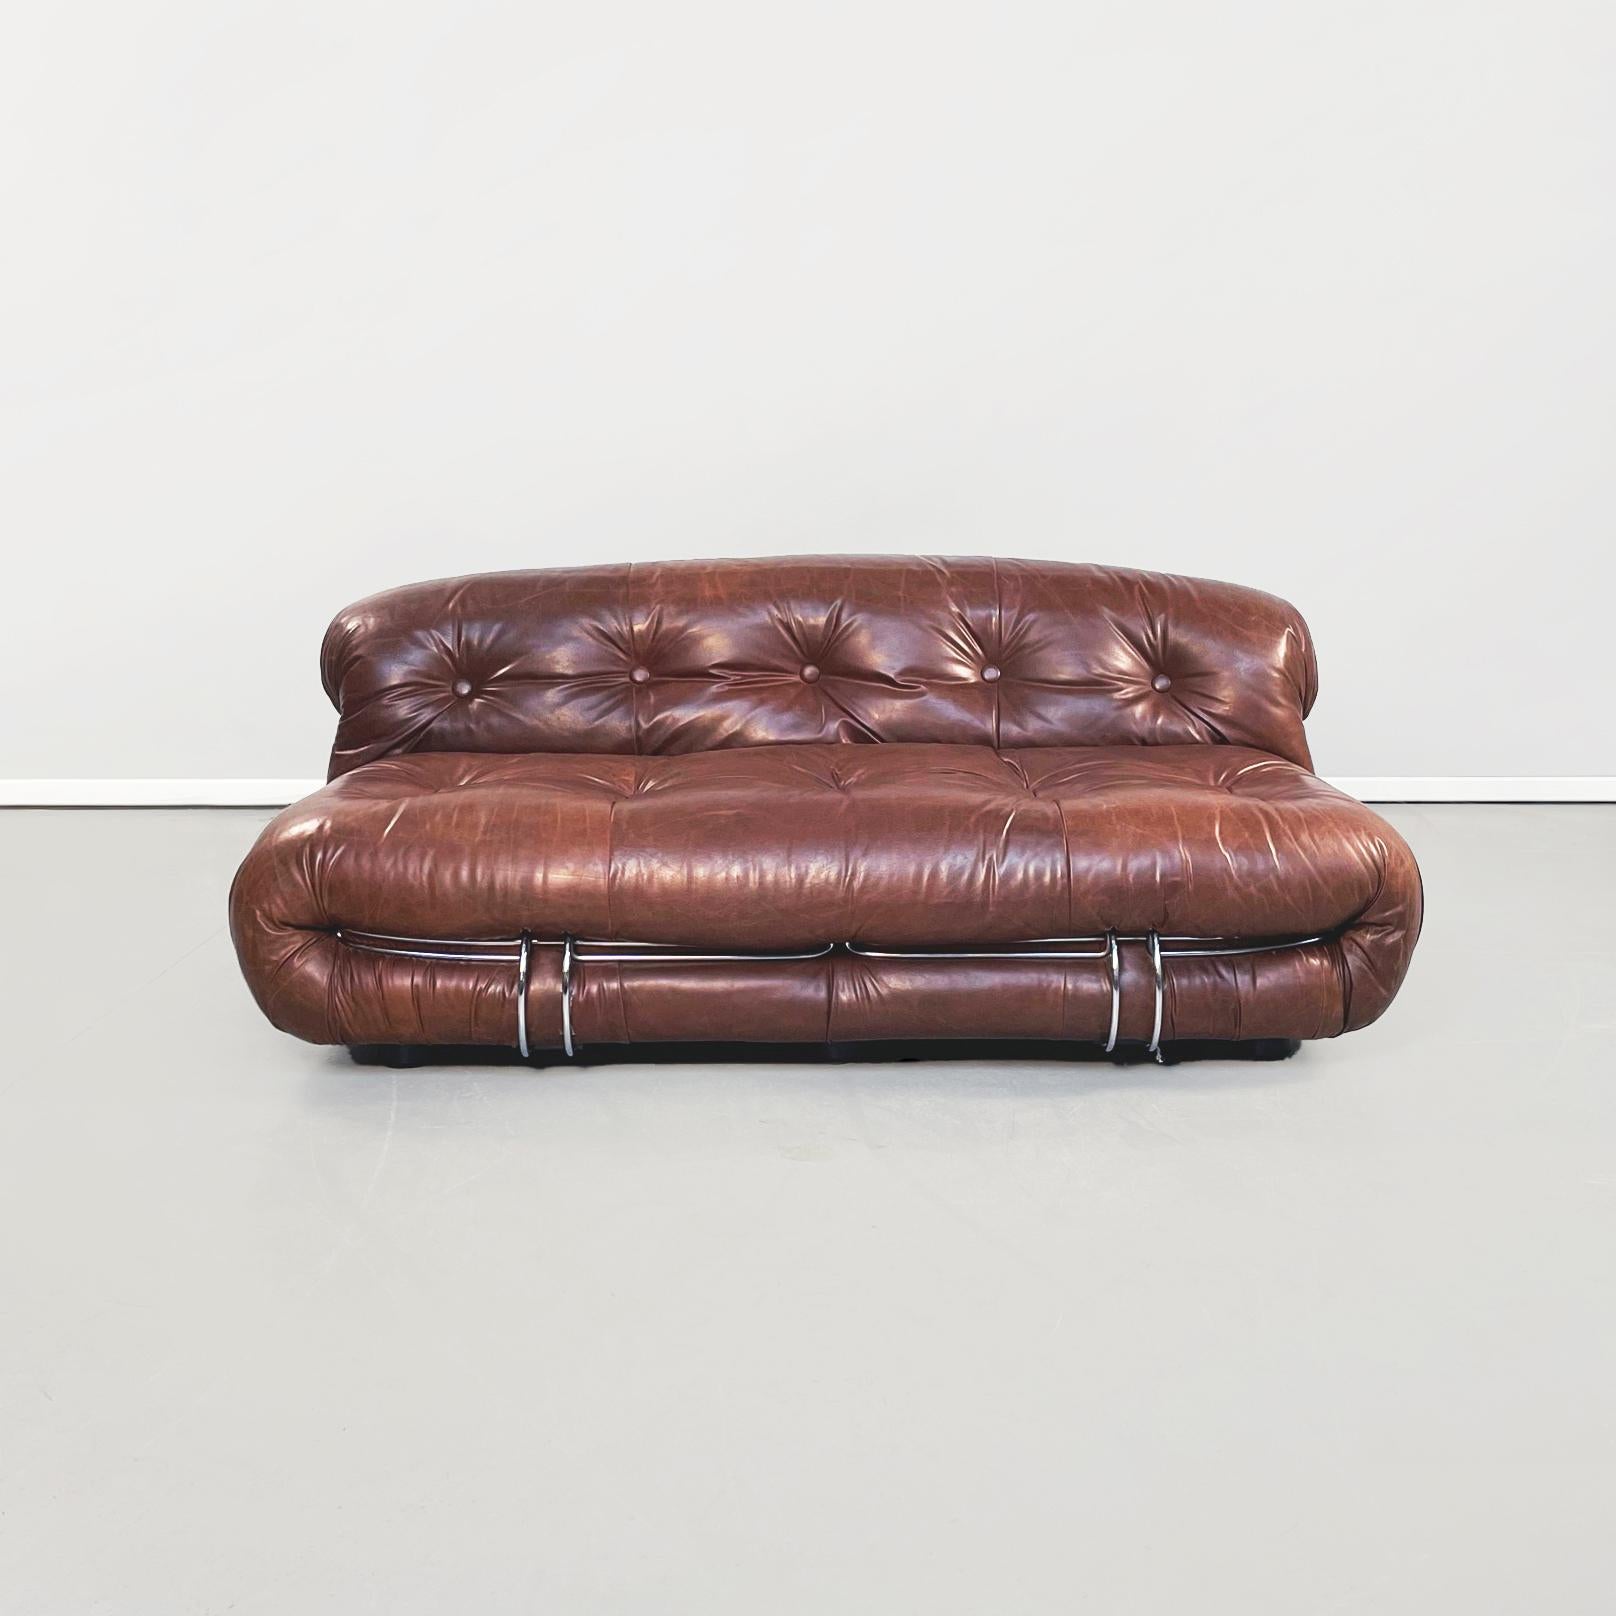 Italian mid-century brown leather Soriana sofa by Afra and Tobia Scarpa for Cassina, 1970s
Soriana two-seater sofa with padding contained by elements in chromed steel rod and upholstery in brown leather. Buttons present on the seat and